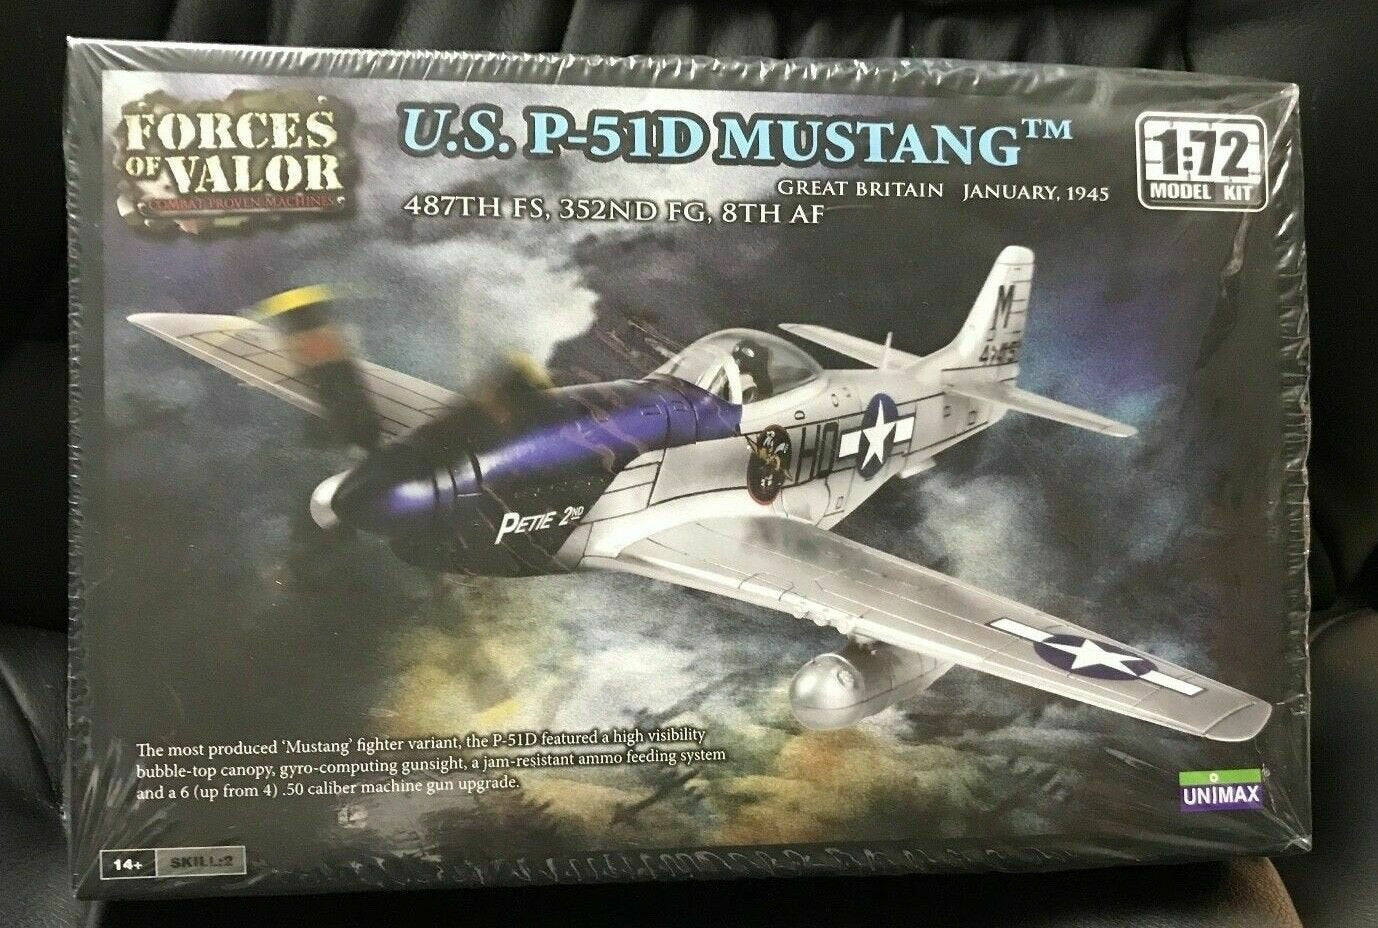  87005 FORCES OF VALOR UNIMAX 1:72 Escala EE.UU. p-51d Mustang